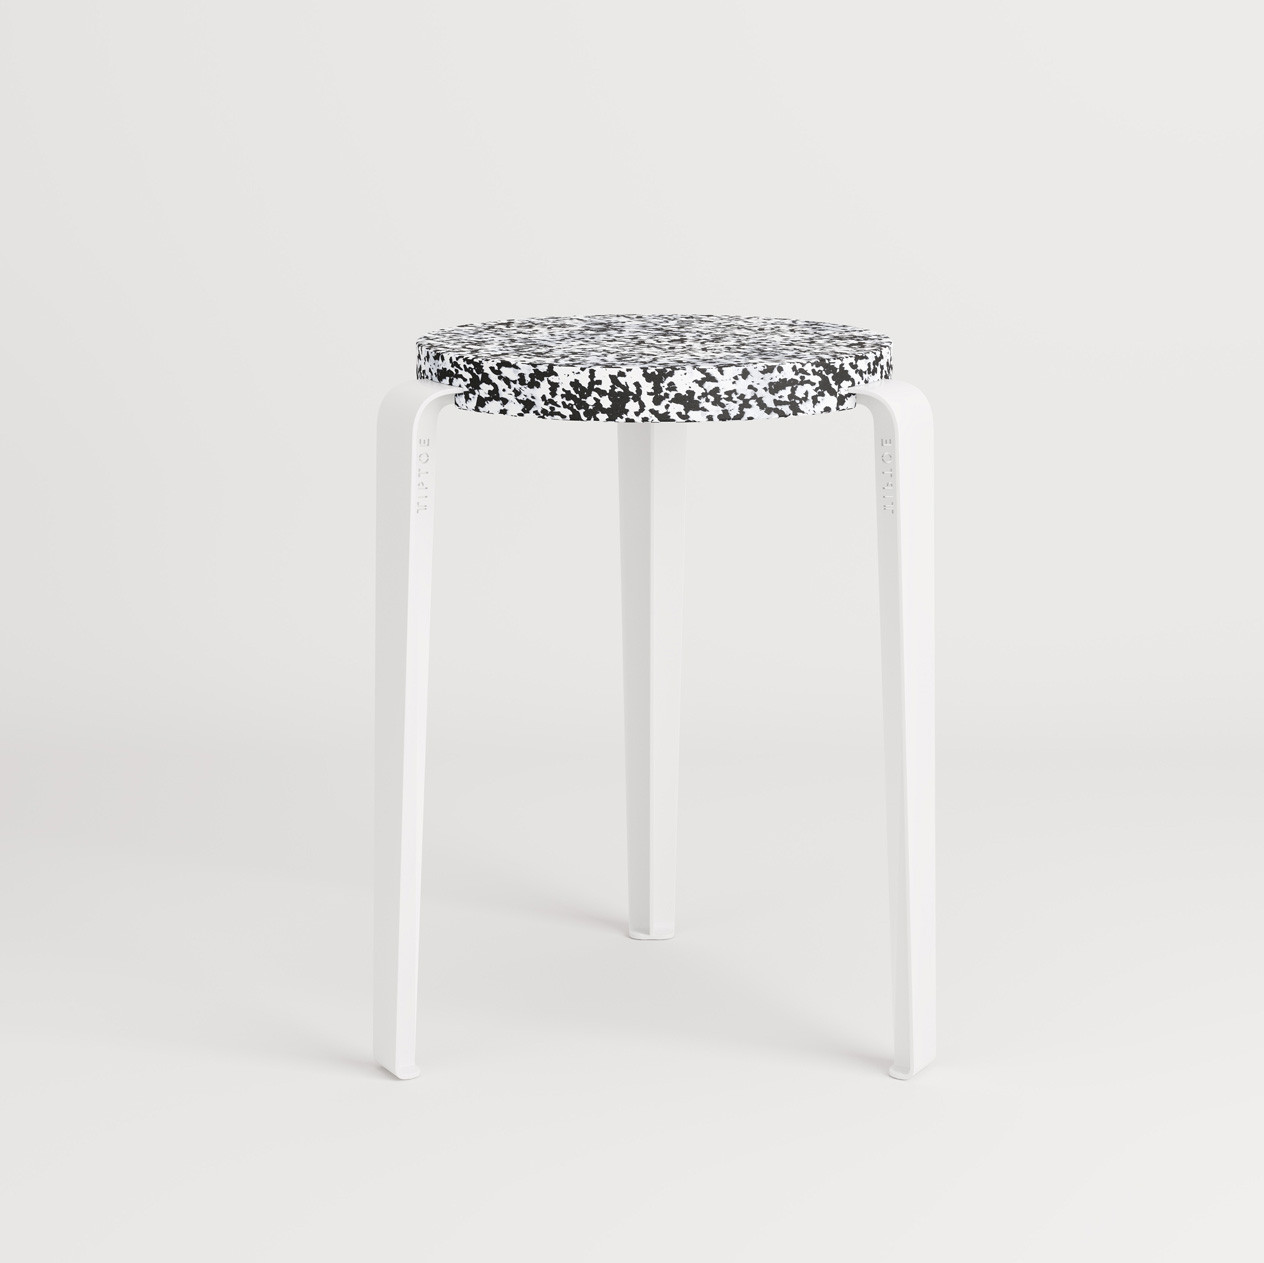 LOU stool in recycled plastic MACCHIATO - Stackable